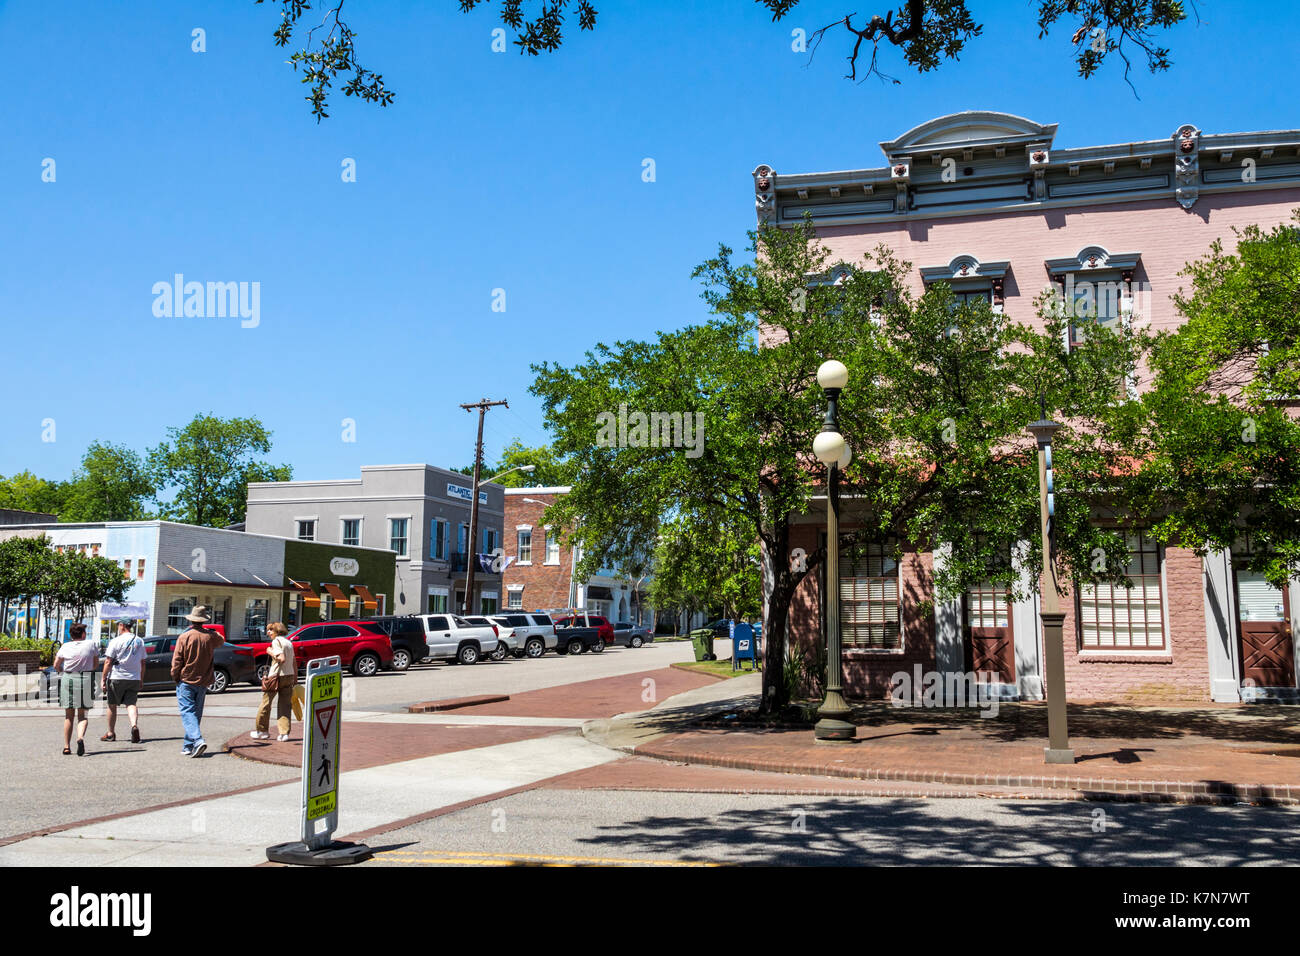 South Carolina, Georgetown, Lowcountry, quartiere storico, Front Street, SC170516053 Foto Stock